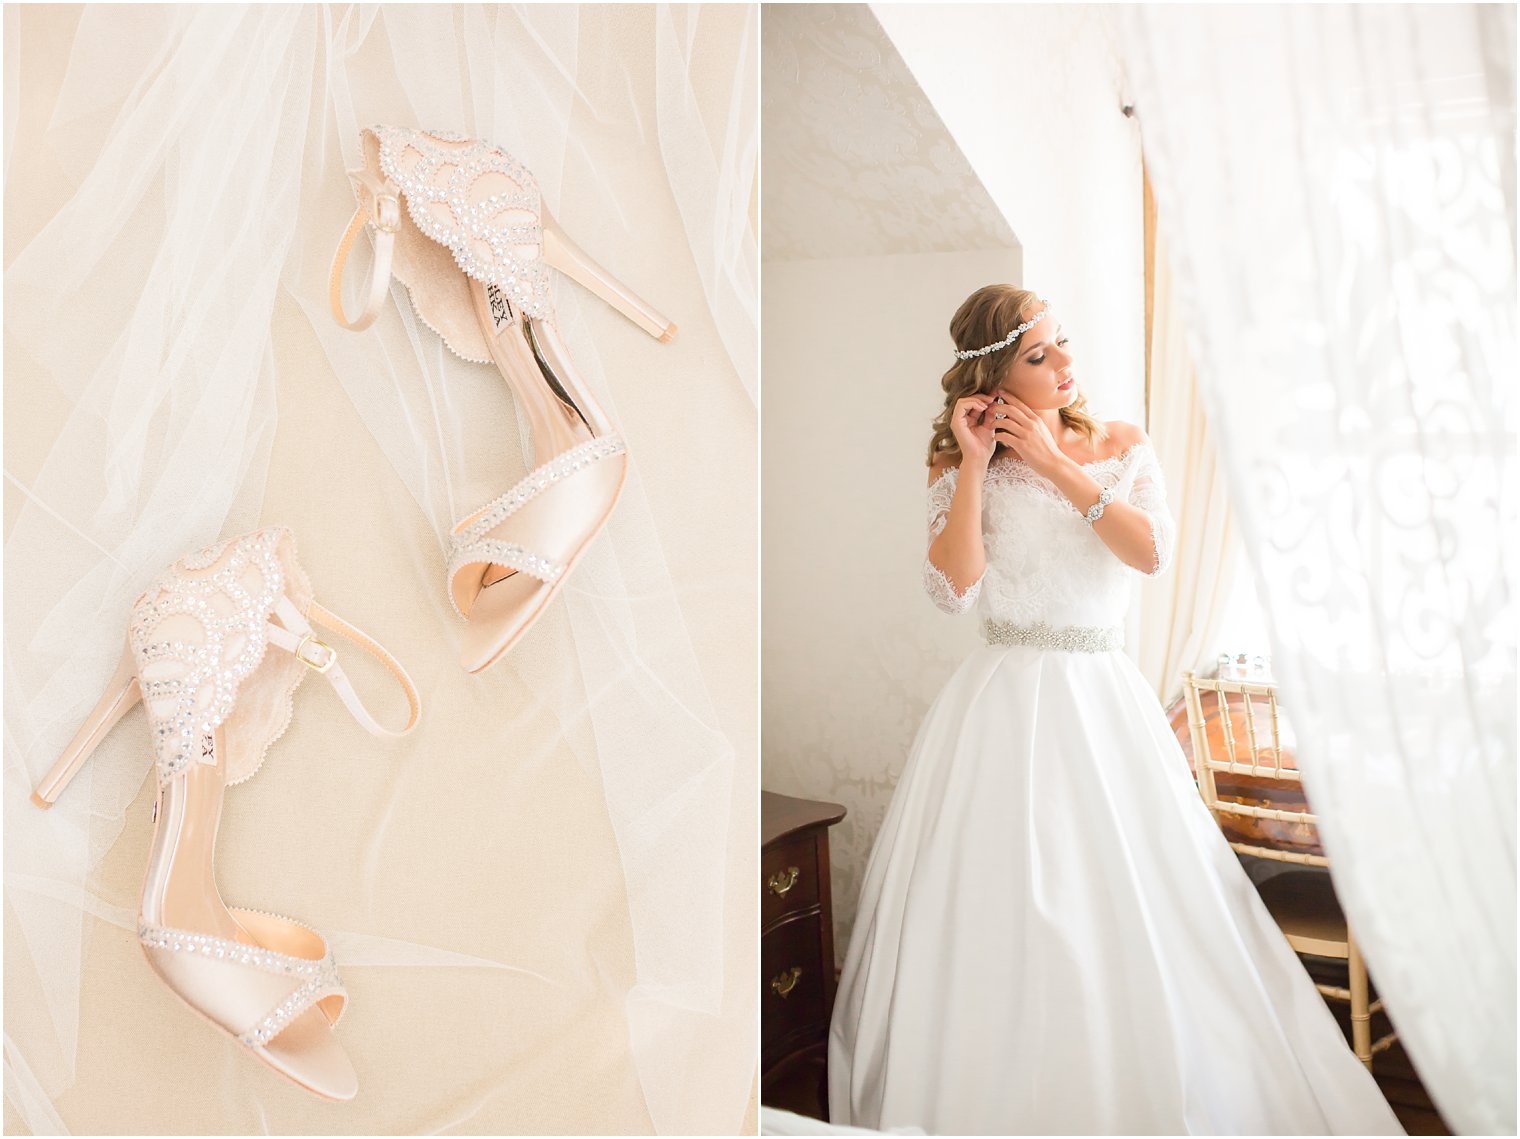 Badgley Mischka Shoes | Bride getting ready at The Gables